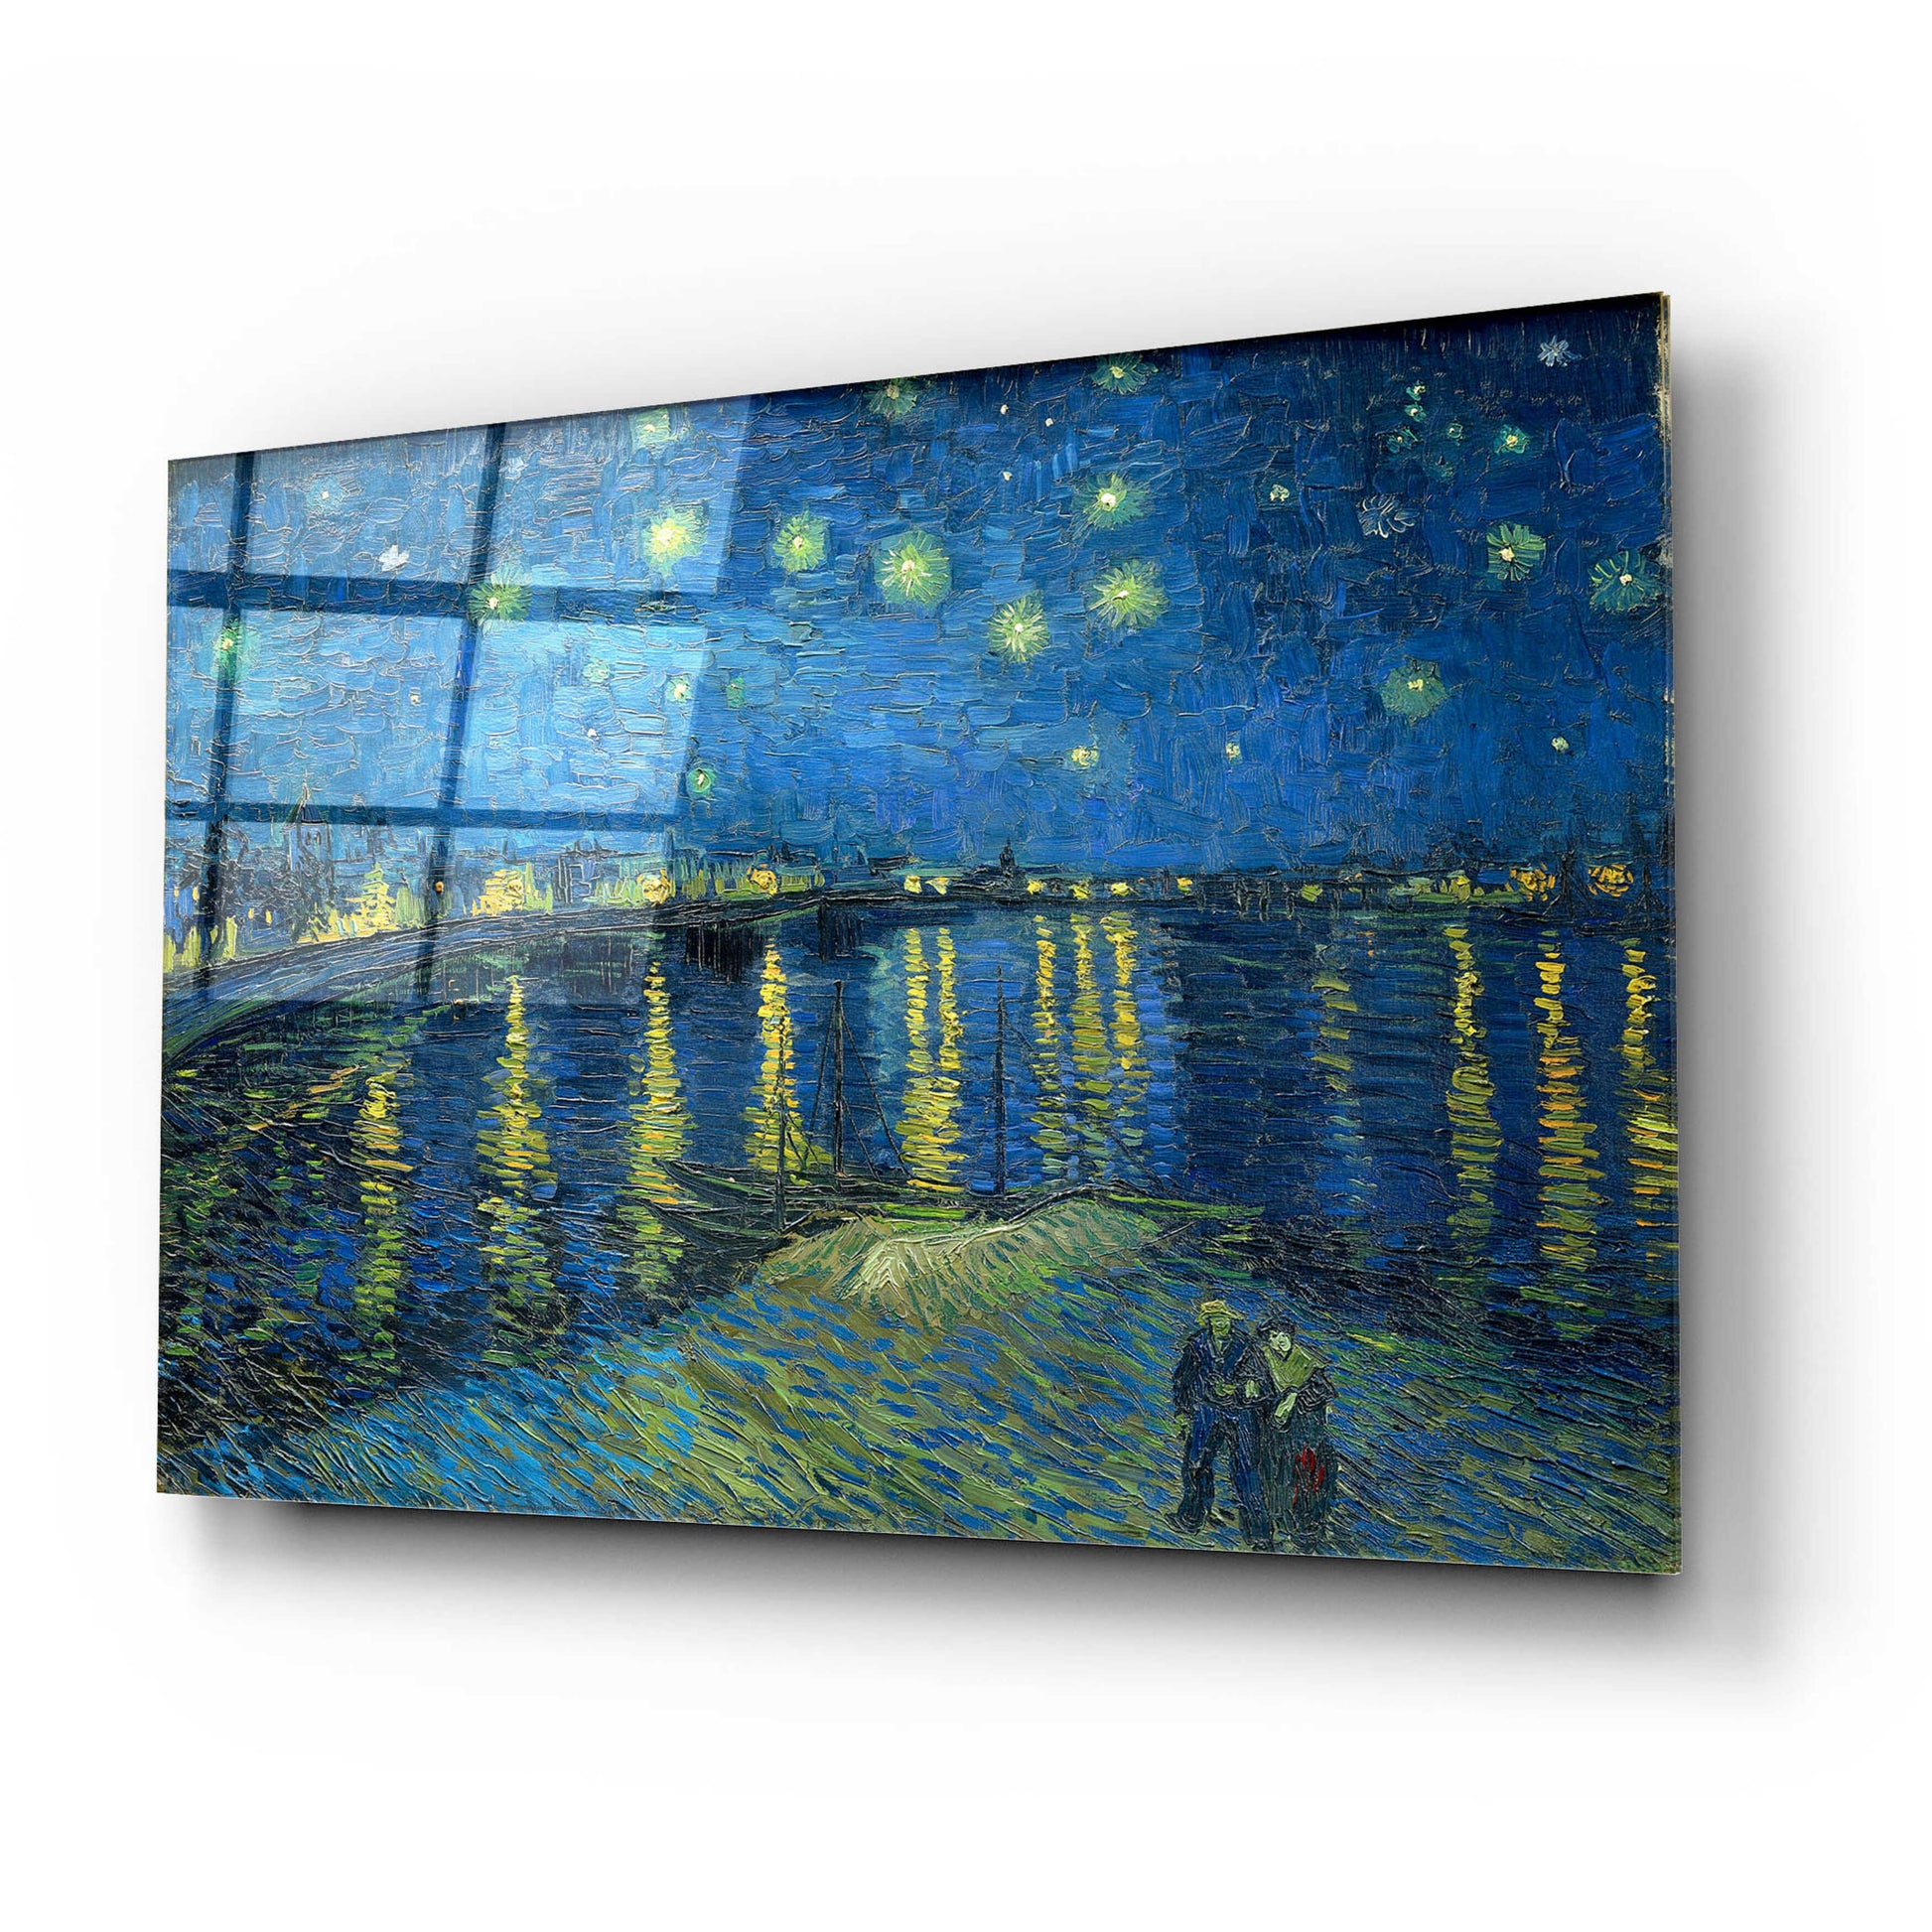 Epic Art 'Starry Night Over the Rhone' by Vincent VanGogh, Acrylic Glass Wall Art,24x16